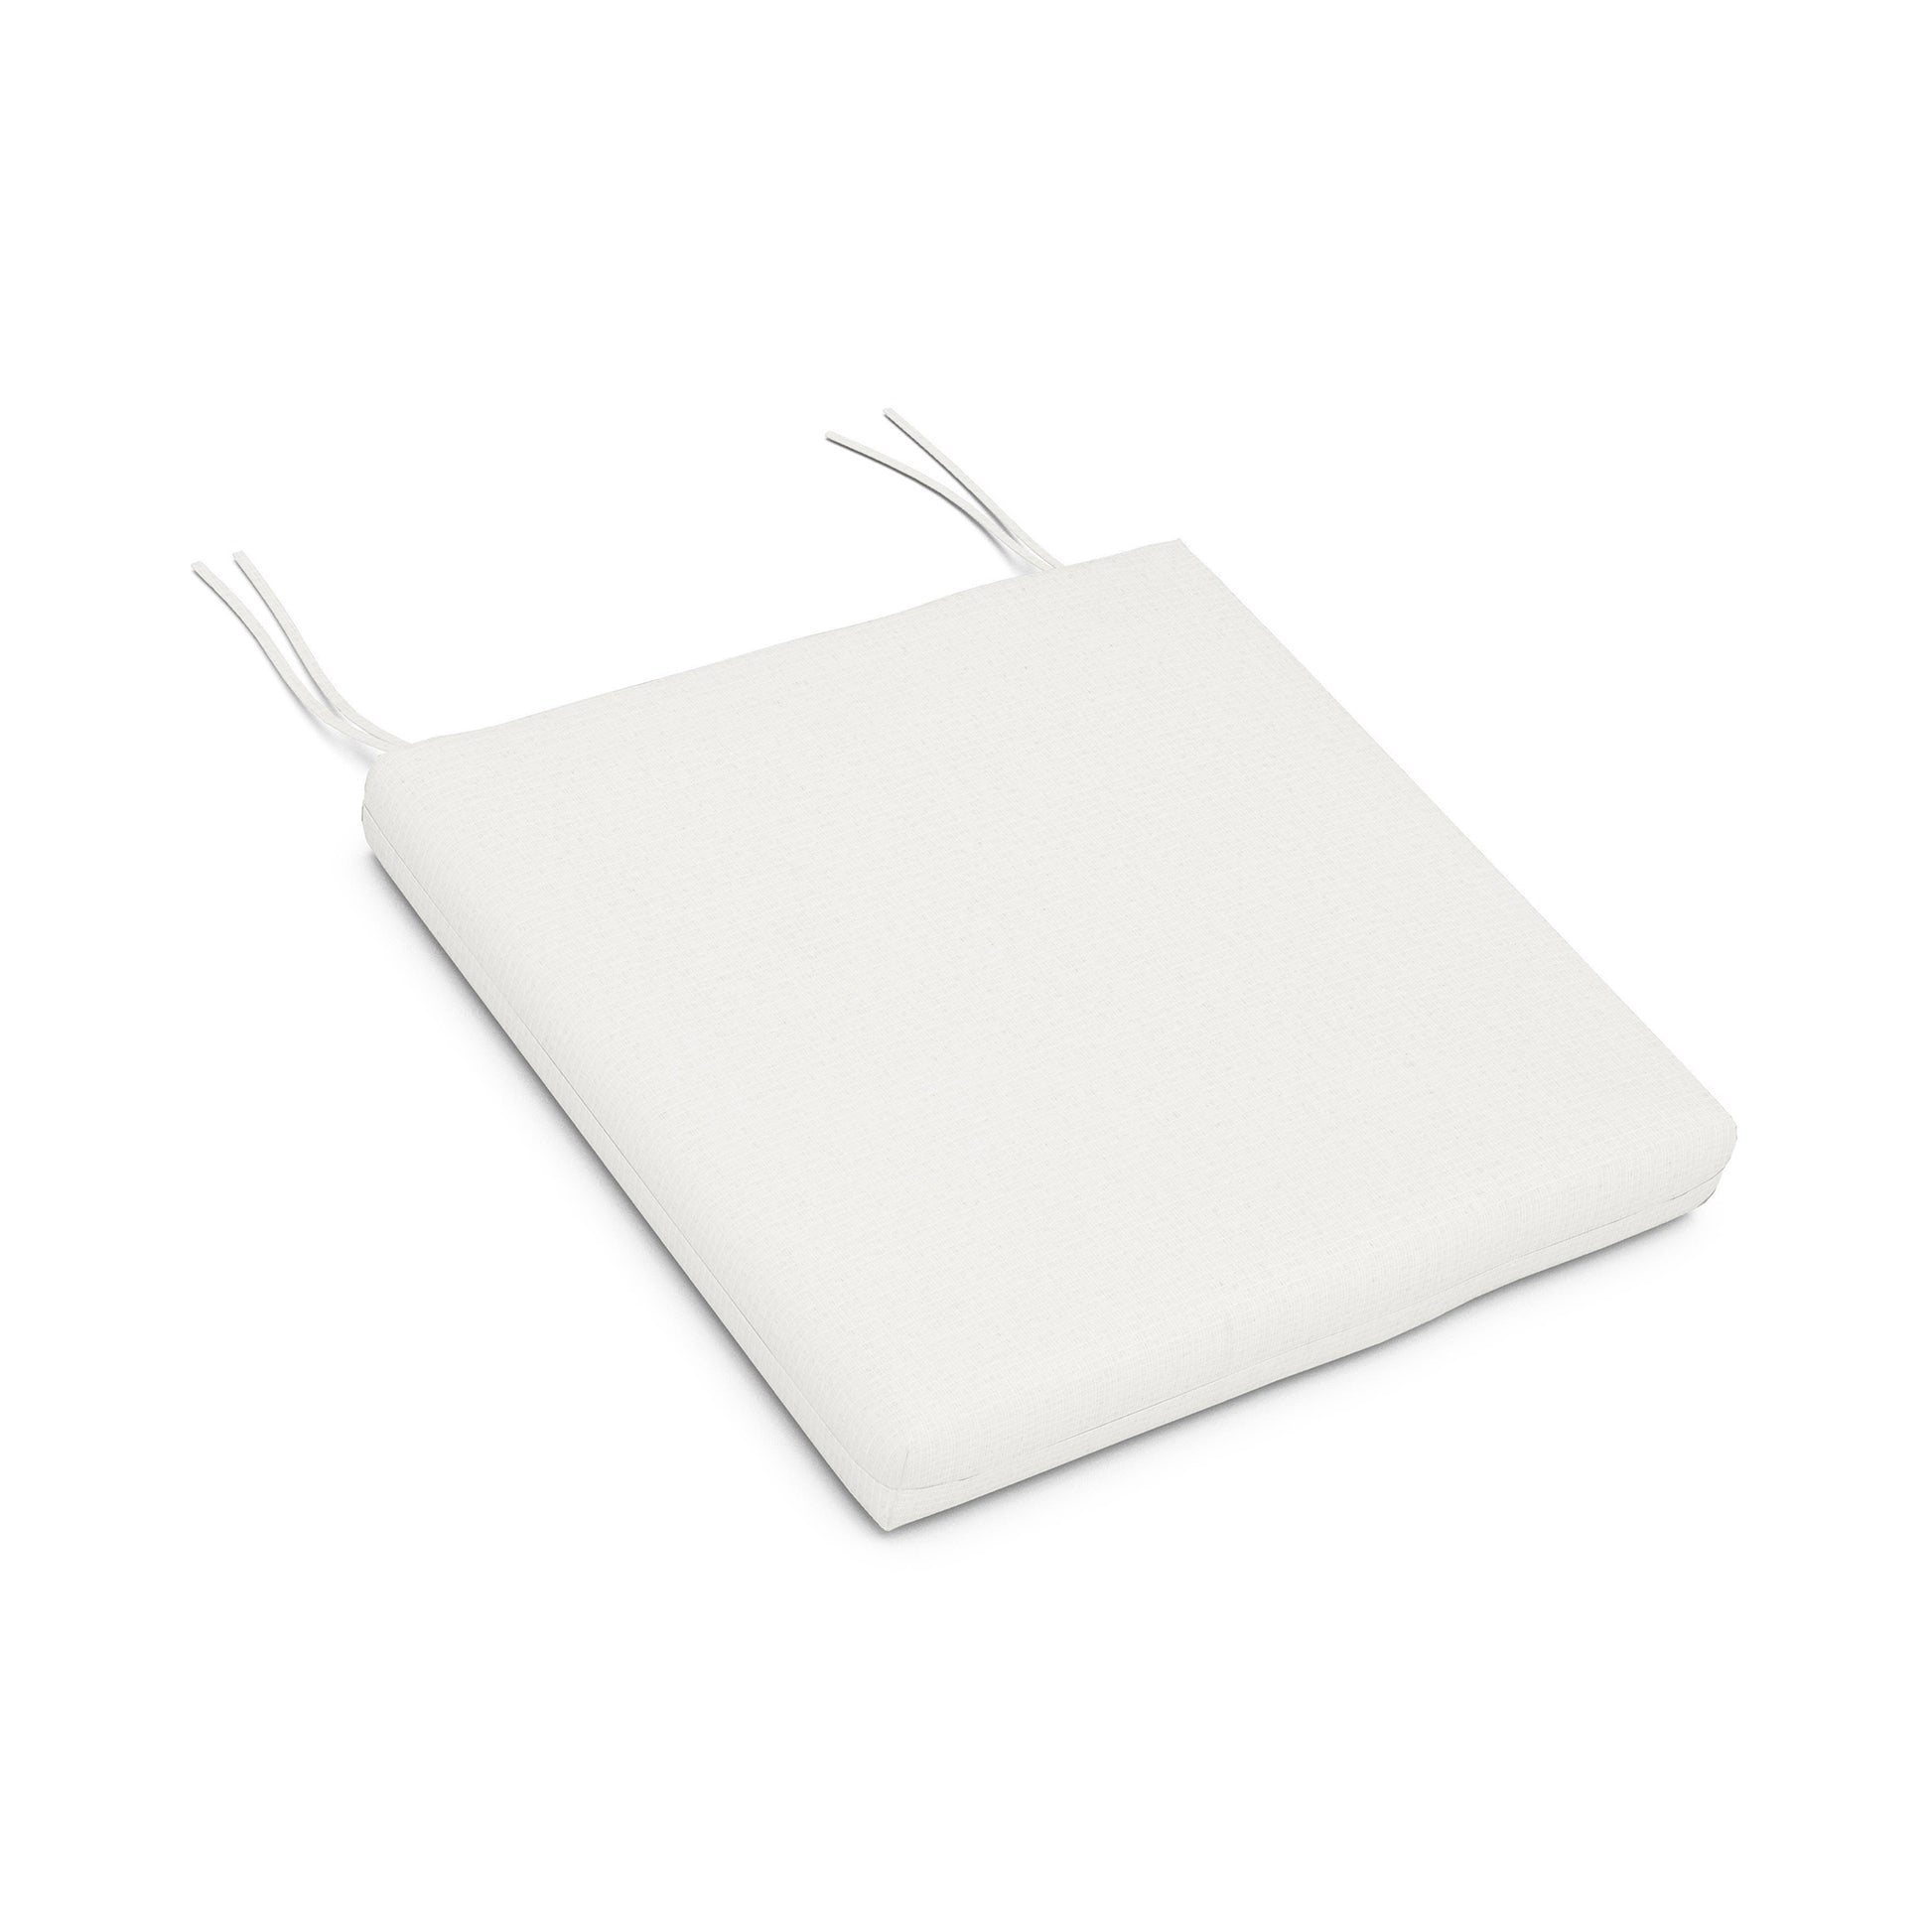 A 3D rendering of a weather-resistant upholstery fabric square cushion with two protruding string ties, isolated on a white background. XPWS0001 - Seat Cushion by POLYWOOD.